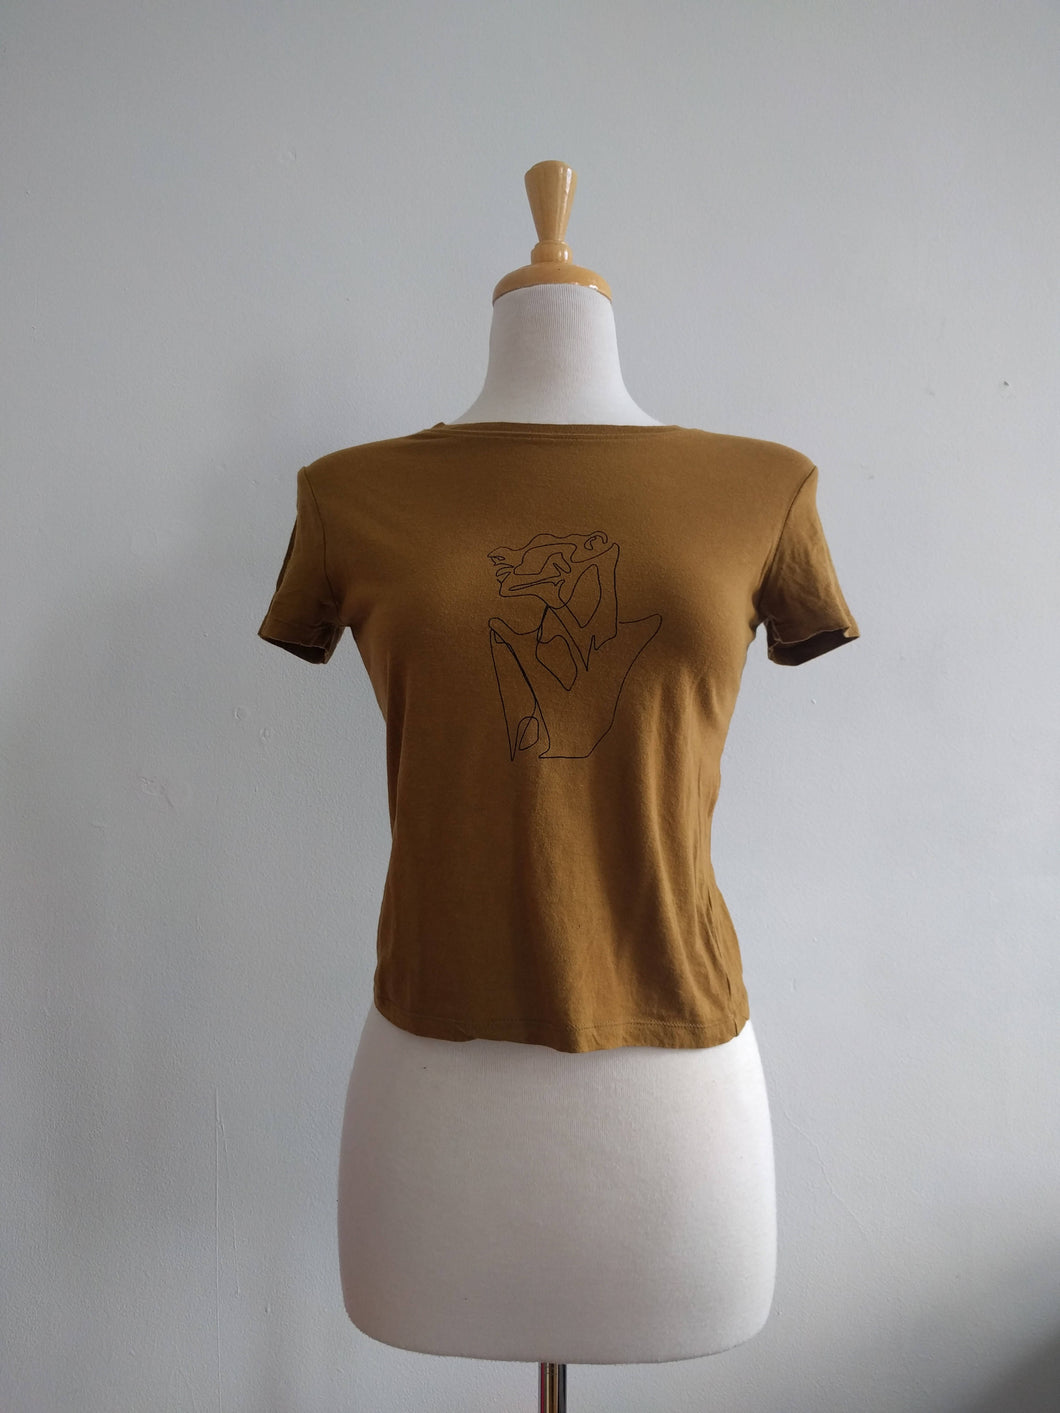 upcycled screen printed one of a kind mustard crop top, ‘oneline bust’ — small